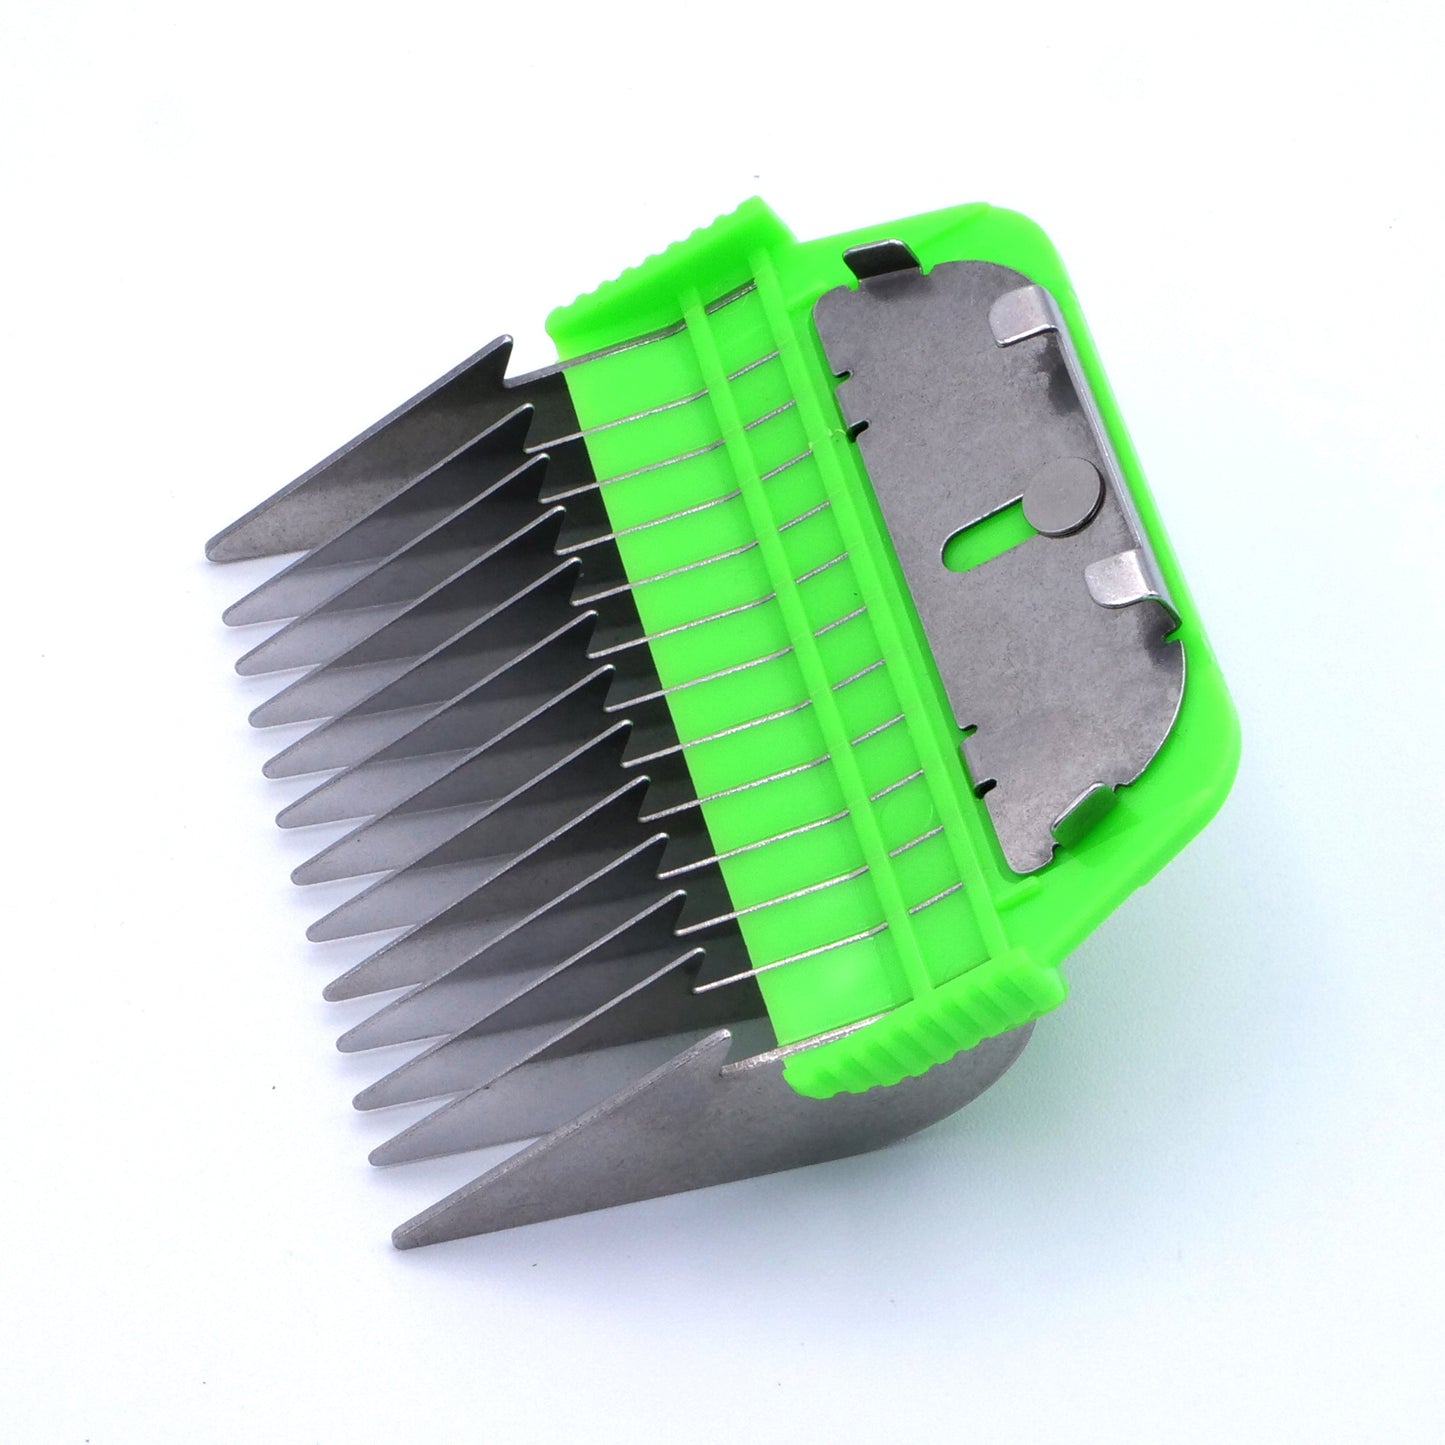 The Artero Wide Snap-On Metal Comb 16mm - 5/8" is designed for use with the Artero A5 wide clipper blade and offers a smooth, even finish. This comb is also compatible with Andis, Moser, Heiniger, Oster, and Aesculap Fav5 and Fav5 CL blades. Features: Cutting height: 5/8" Metal Construction Fits A5 Clippers.